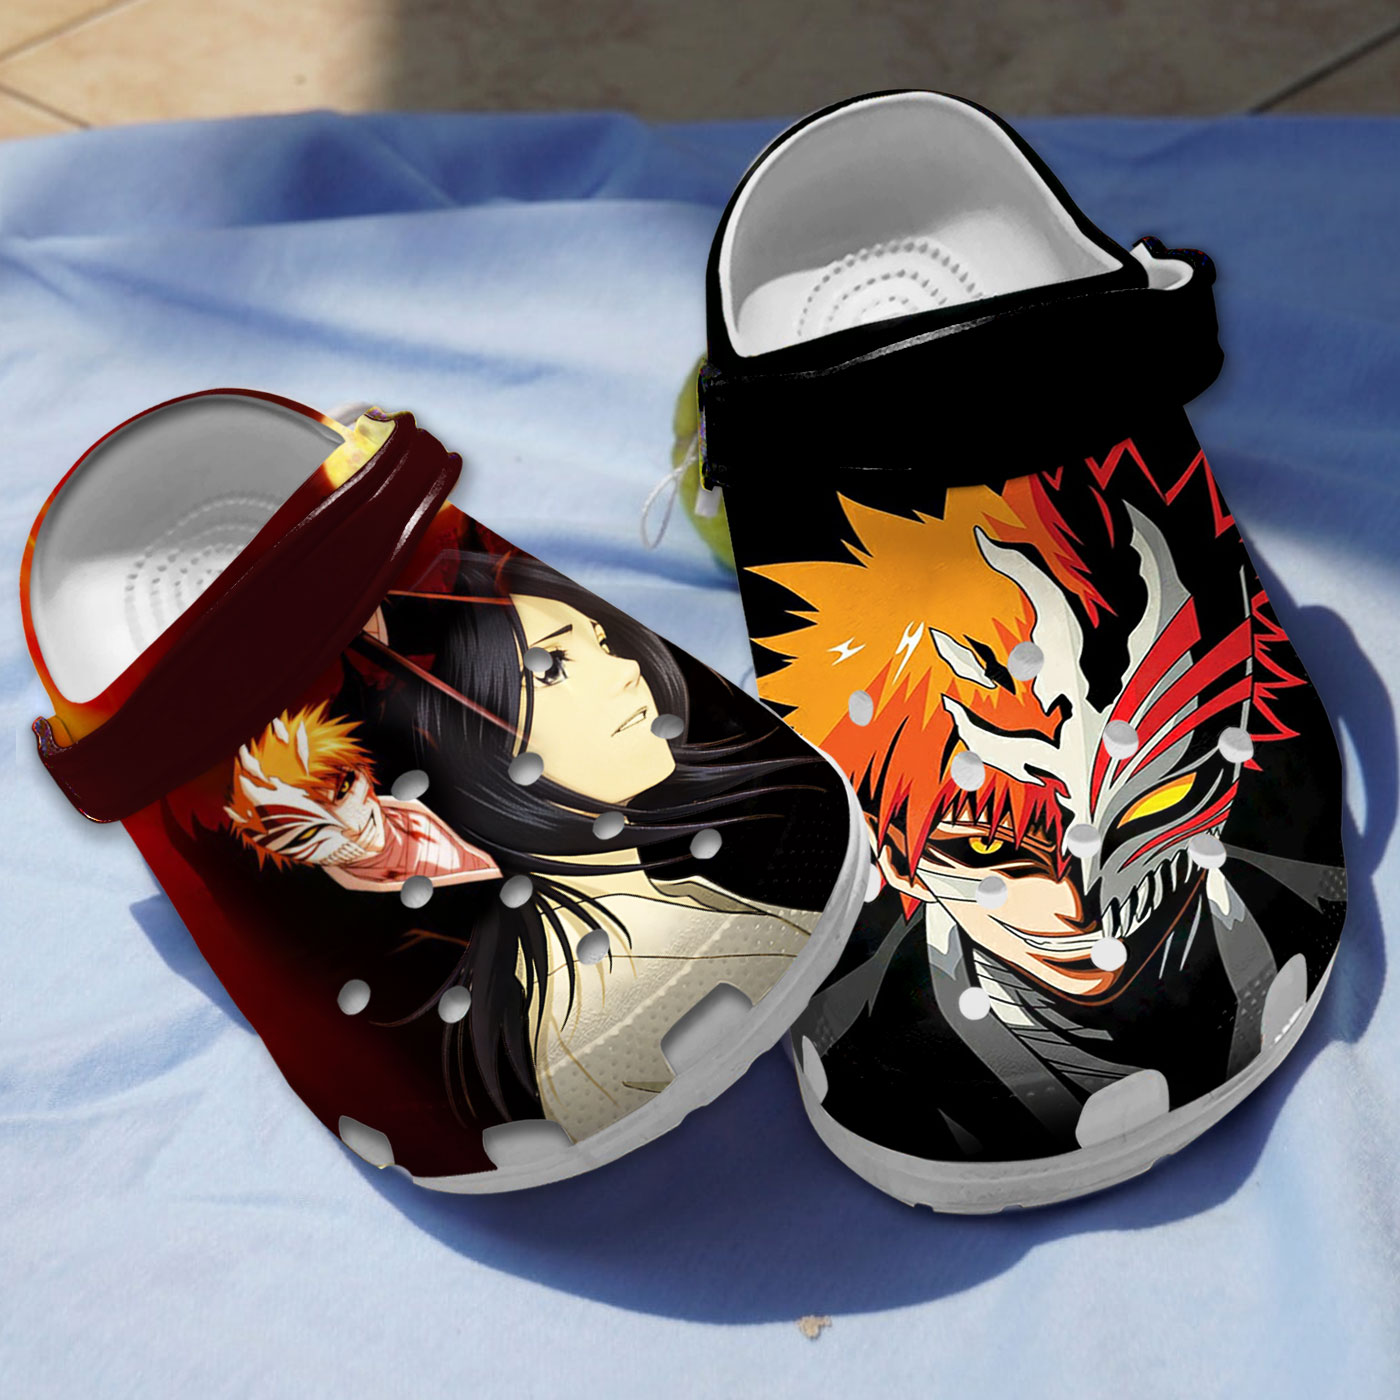 Pre release date Naruto Crocs for the Anime fans : r/crocs